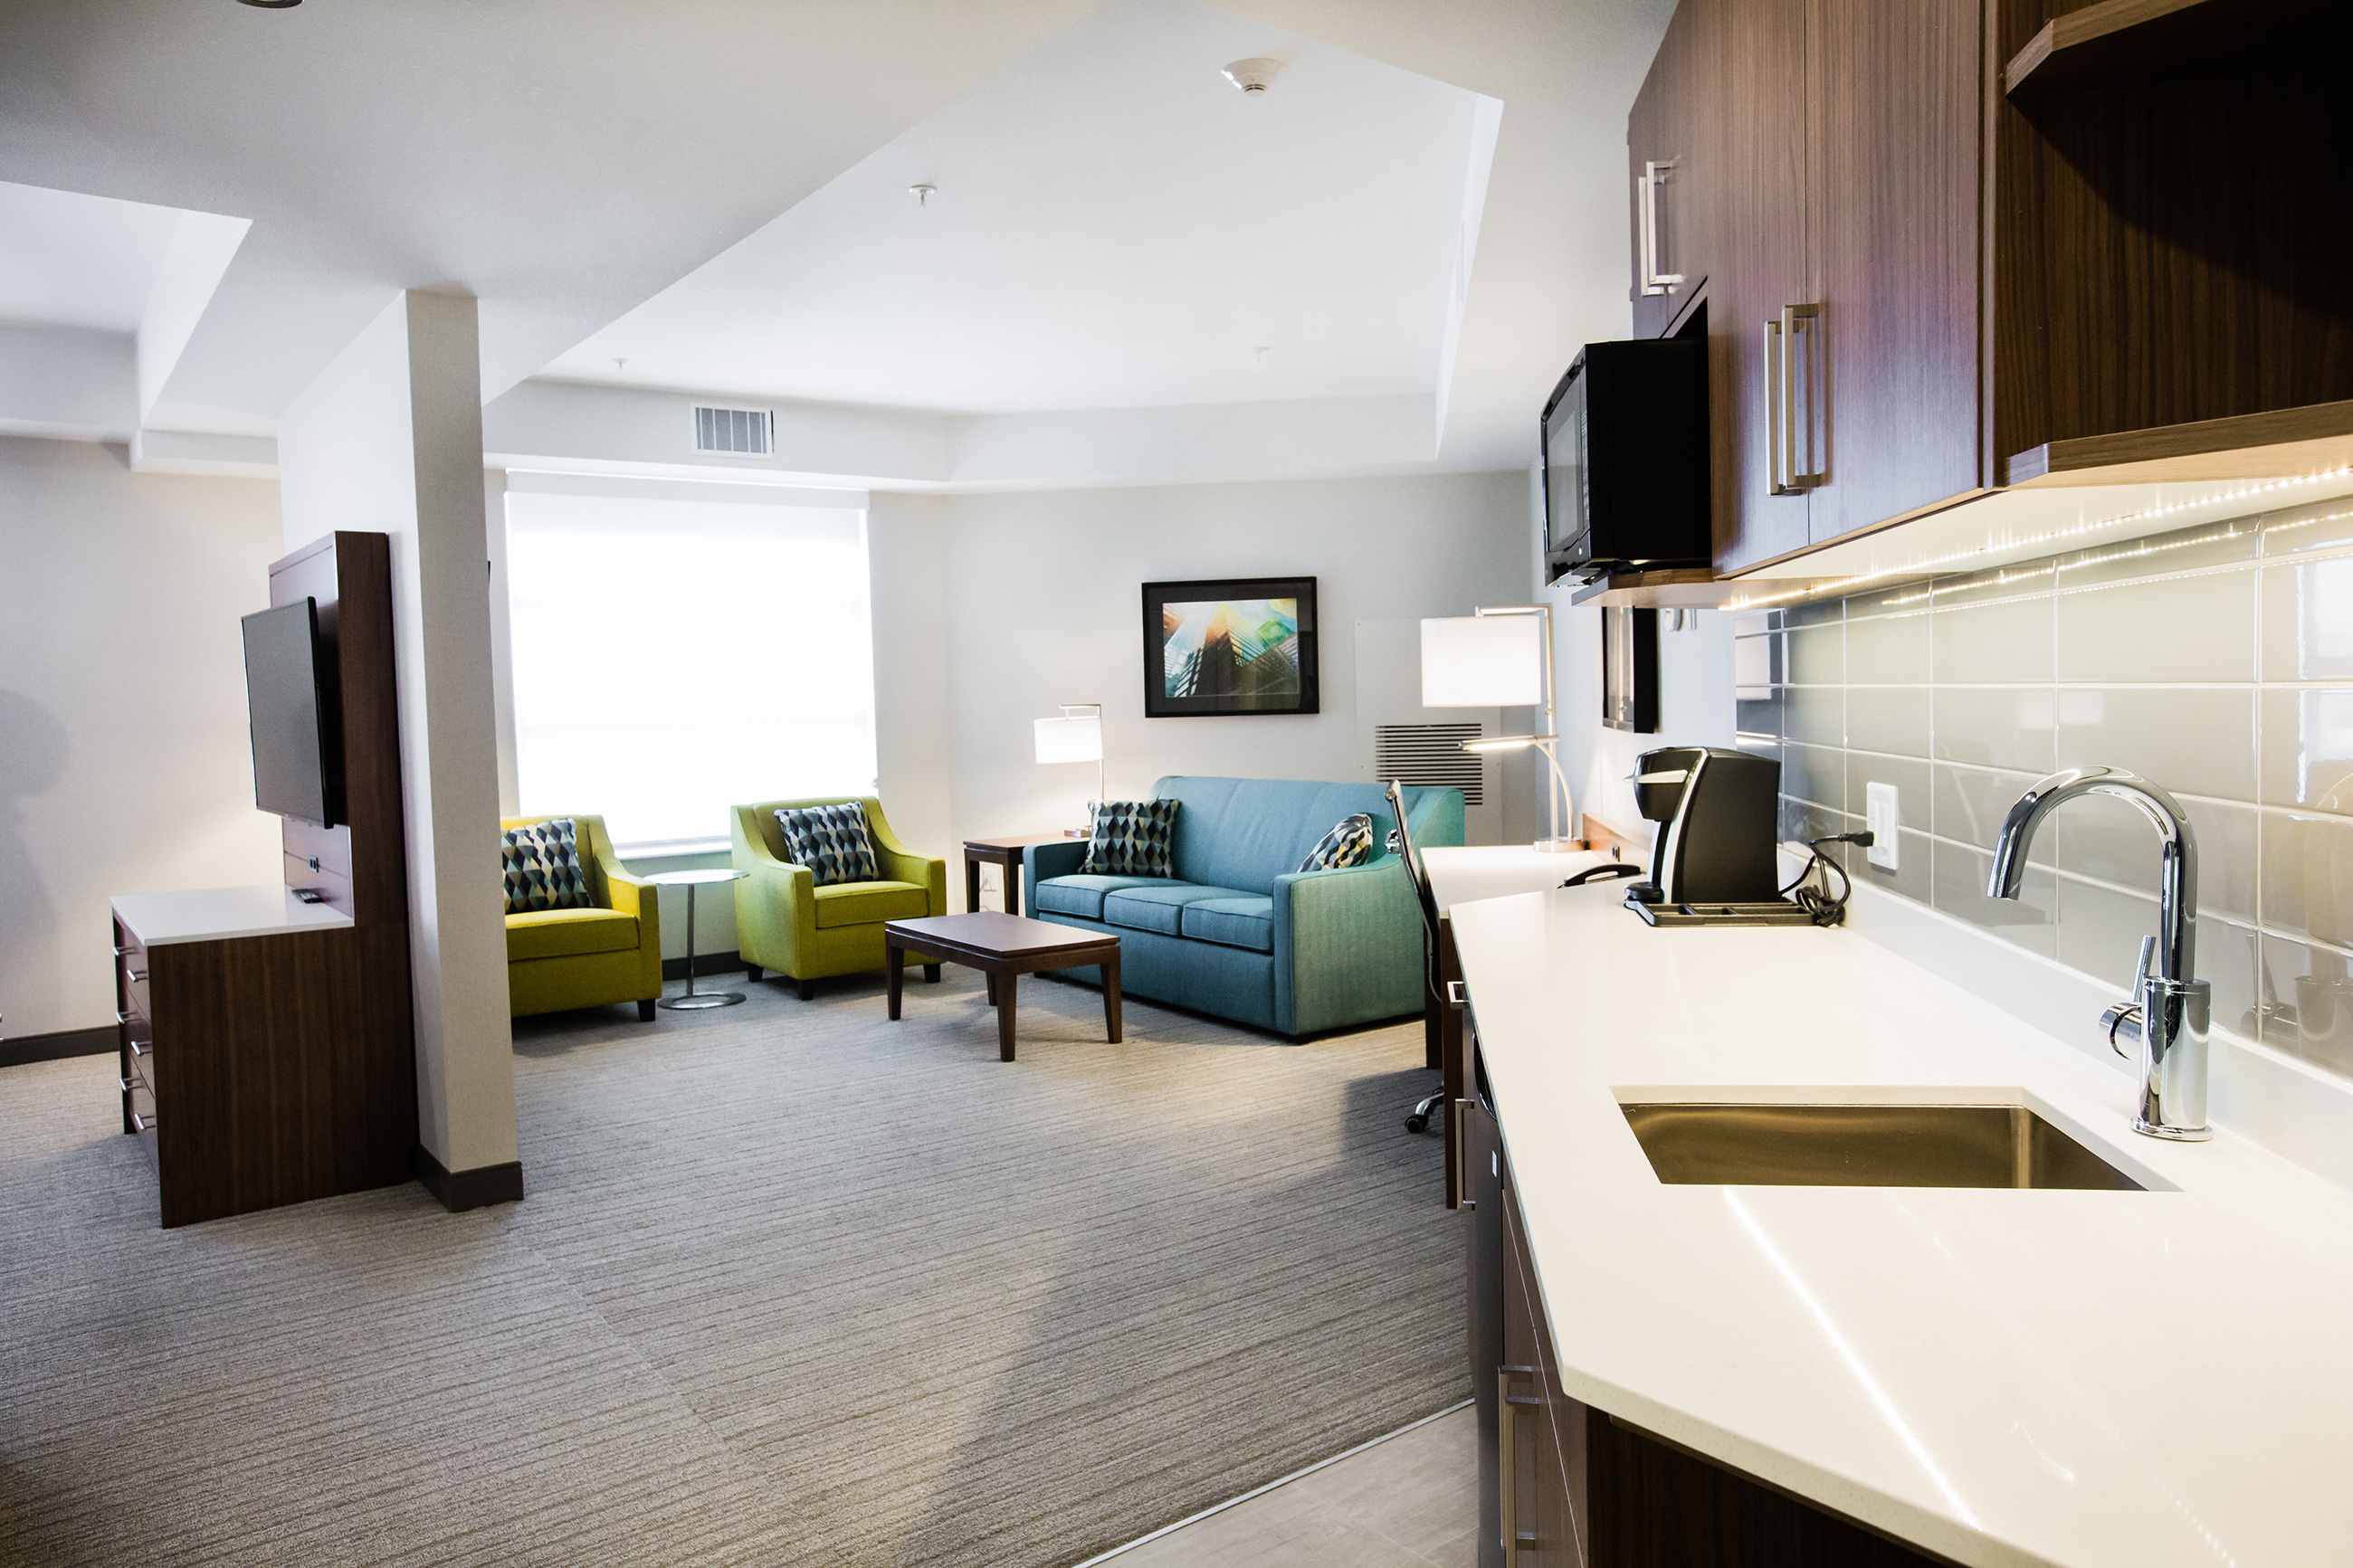 Upgrade! More space and a king bedroom suite at the Holiday Inn & Suites Calgary South Conference Center